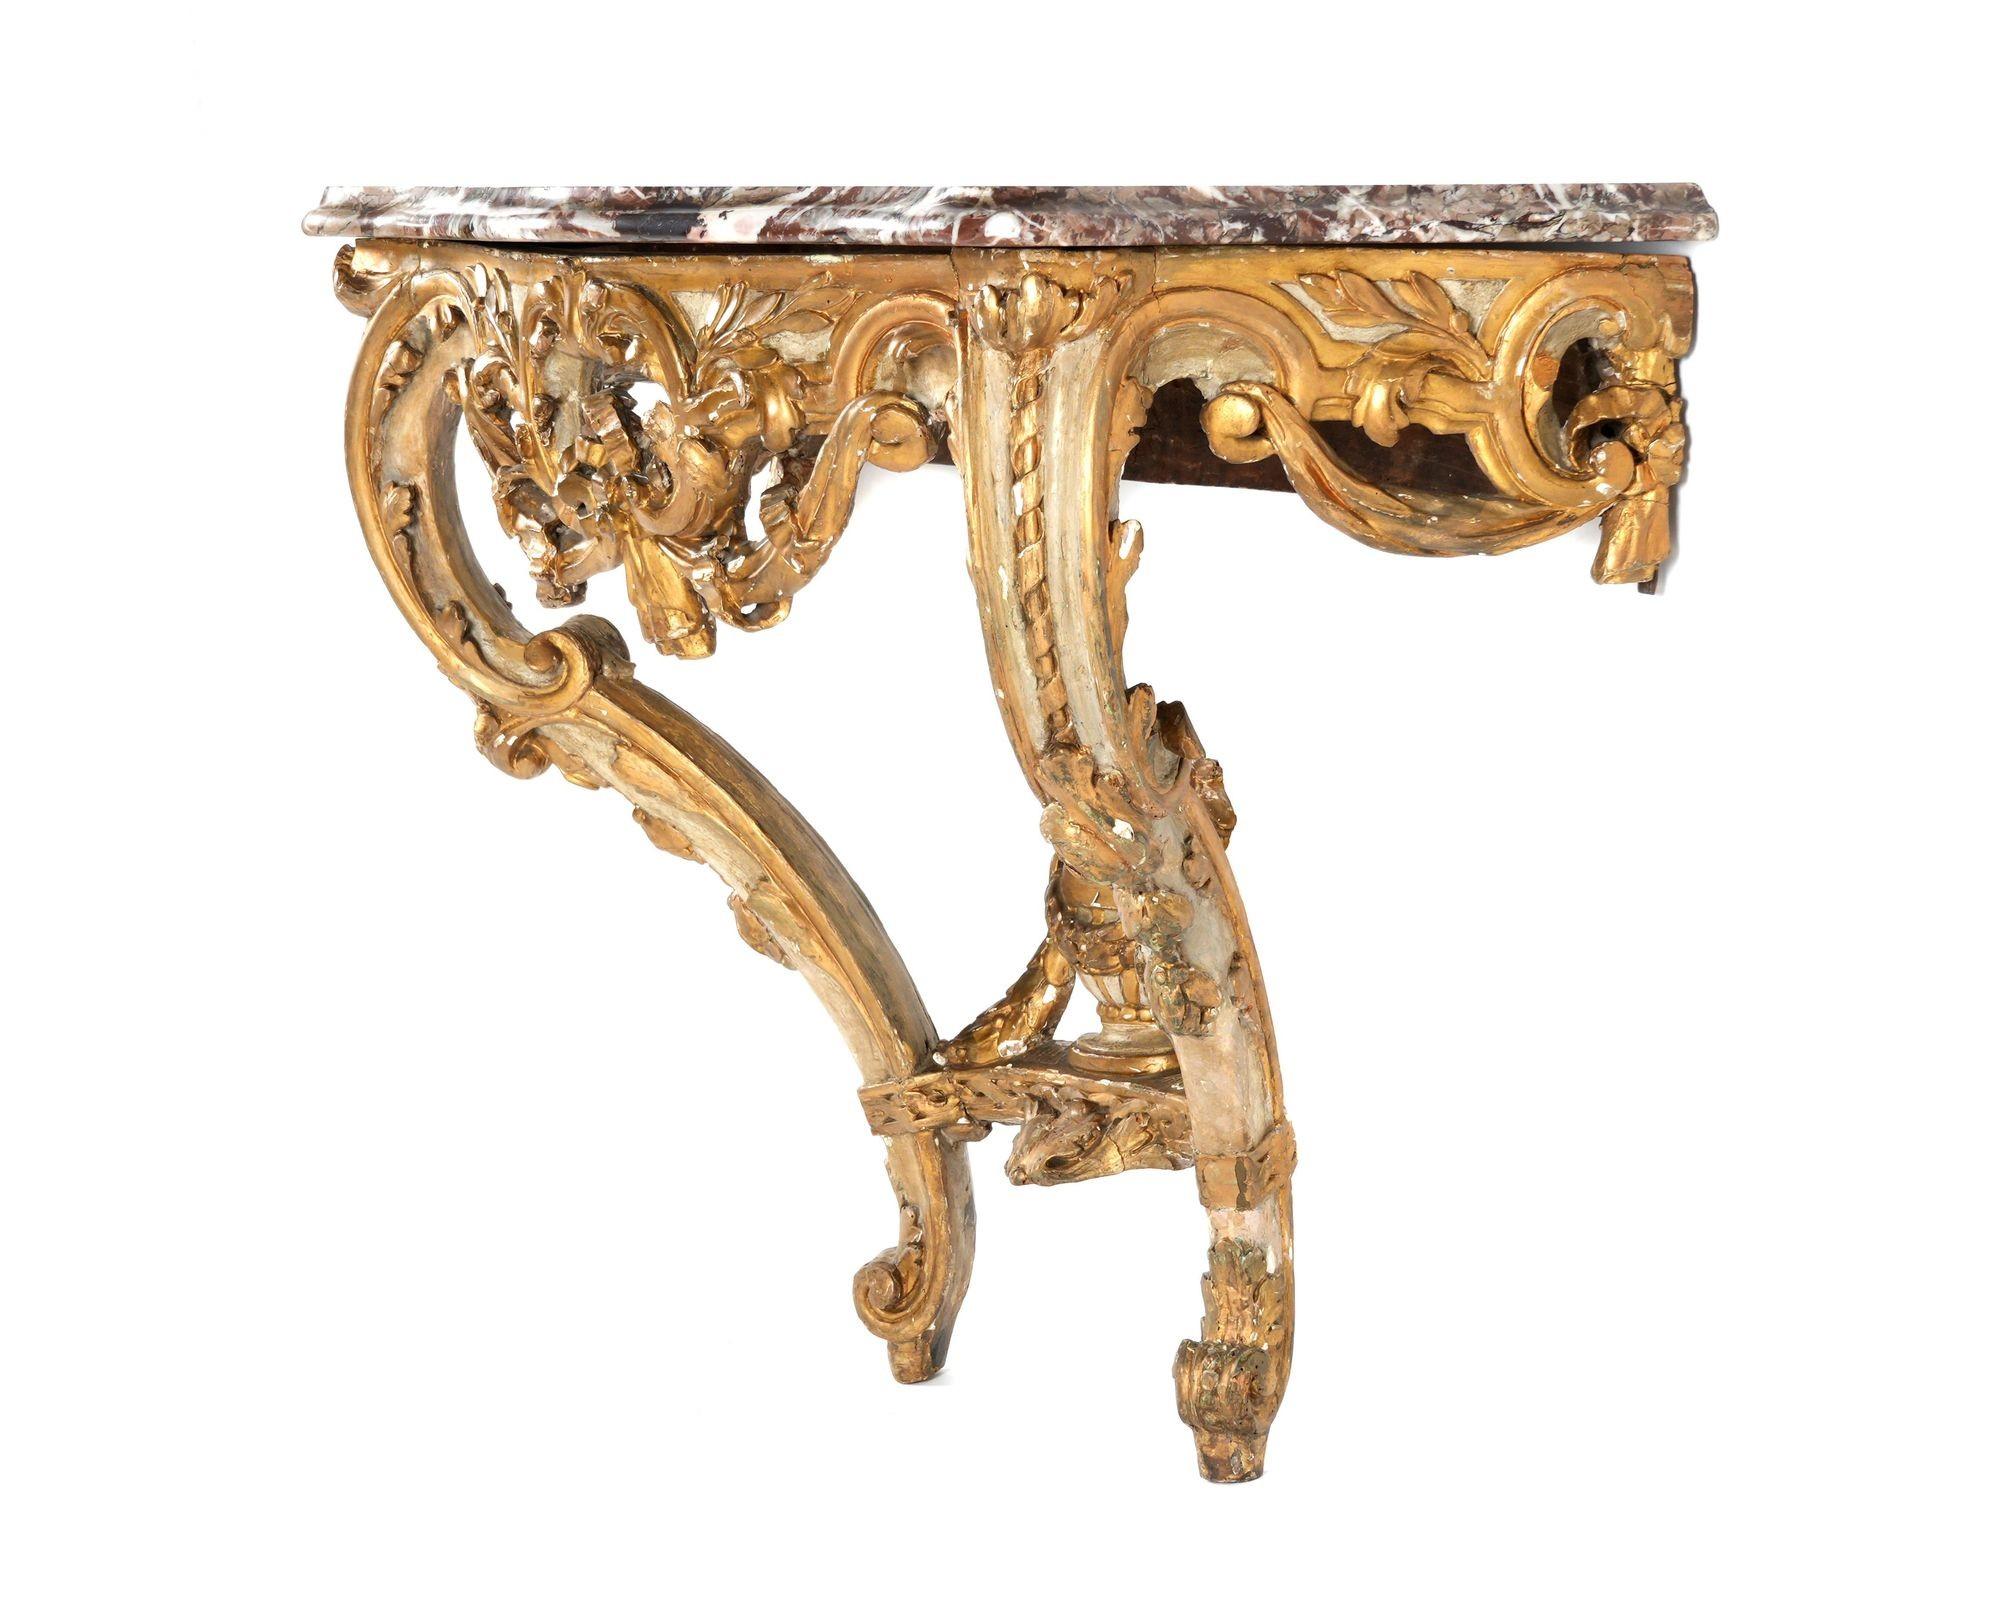 Palatial Louis XV style hand carved gilt-wood console made in France, Late 18th Century, having a veined marble top in alluring red and white tones. The gilt-wood work is adorned with delicate hand-carved botanical figures.
A notable centerpiece of